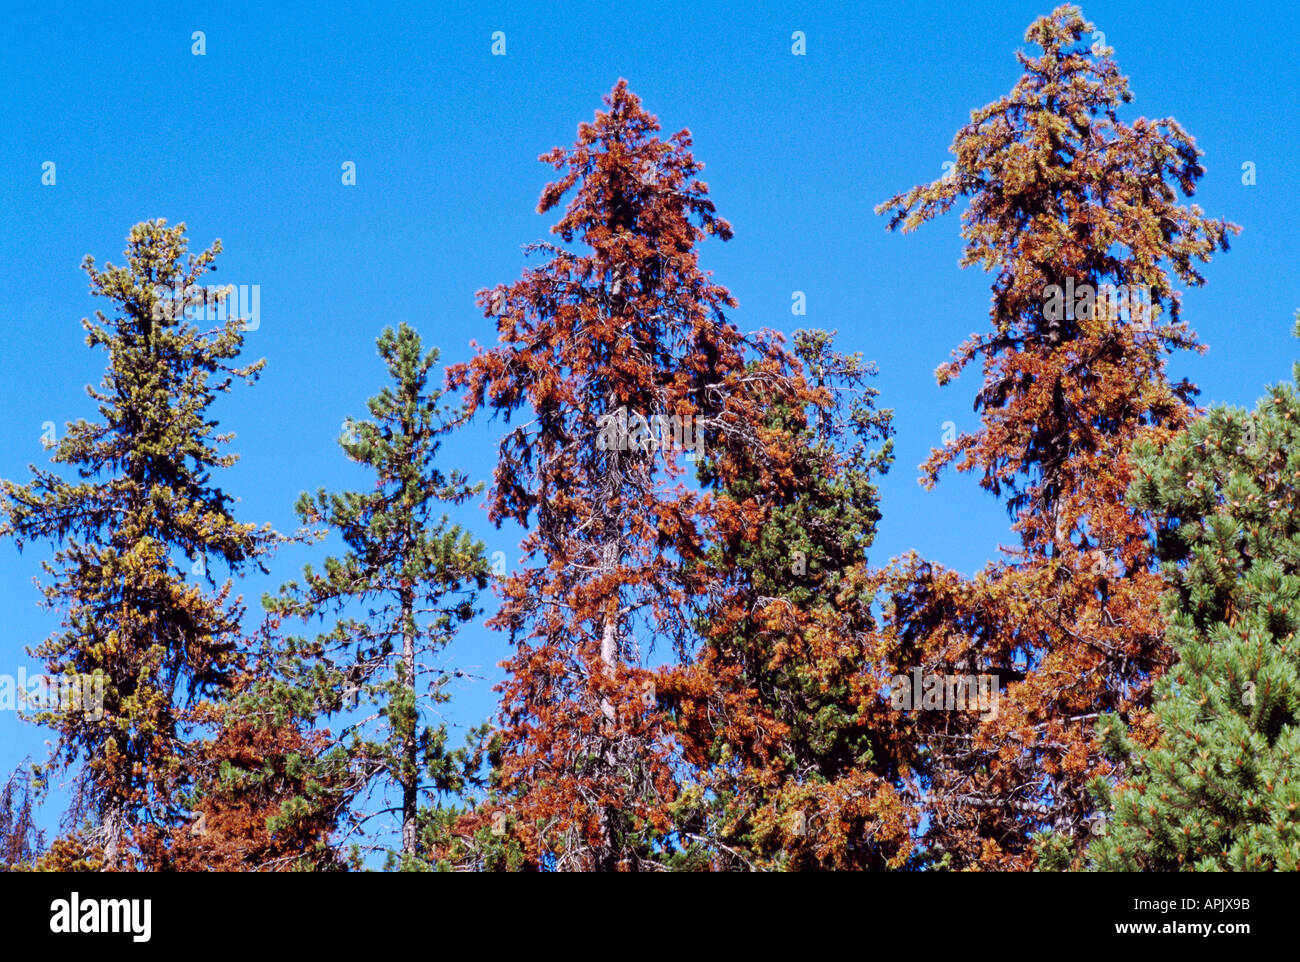 Dying Lodgepole Pine Trees (Pinus contorta) infested by Mountain Pine Beetle, Insect Infestation, BC, British Columbia, Canada Stock Photo